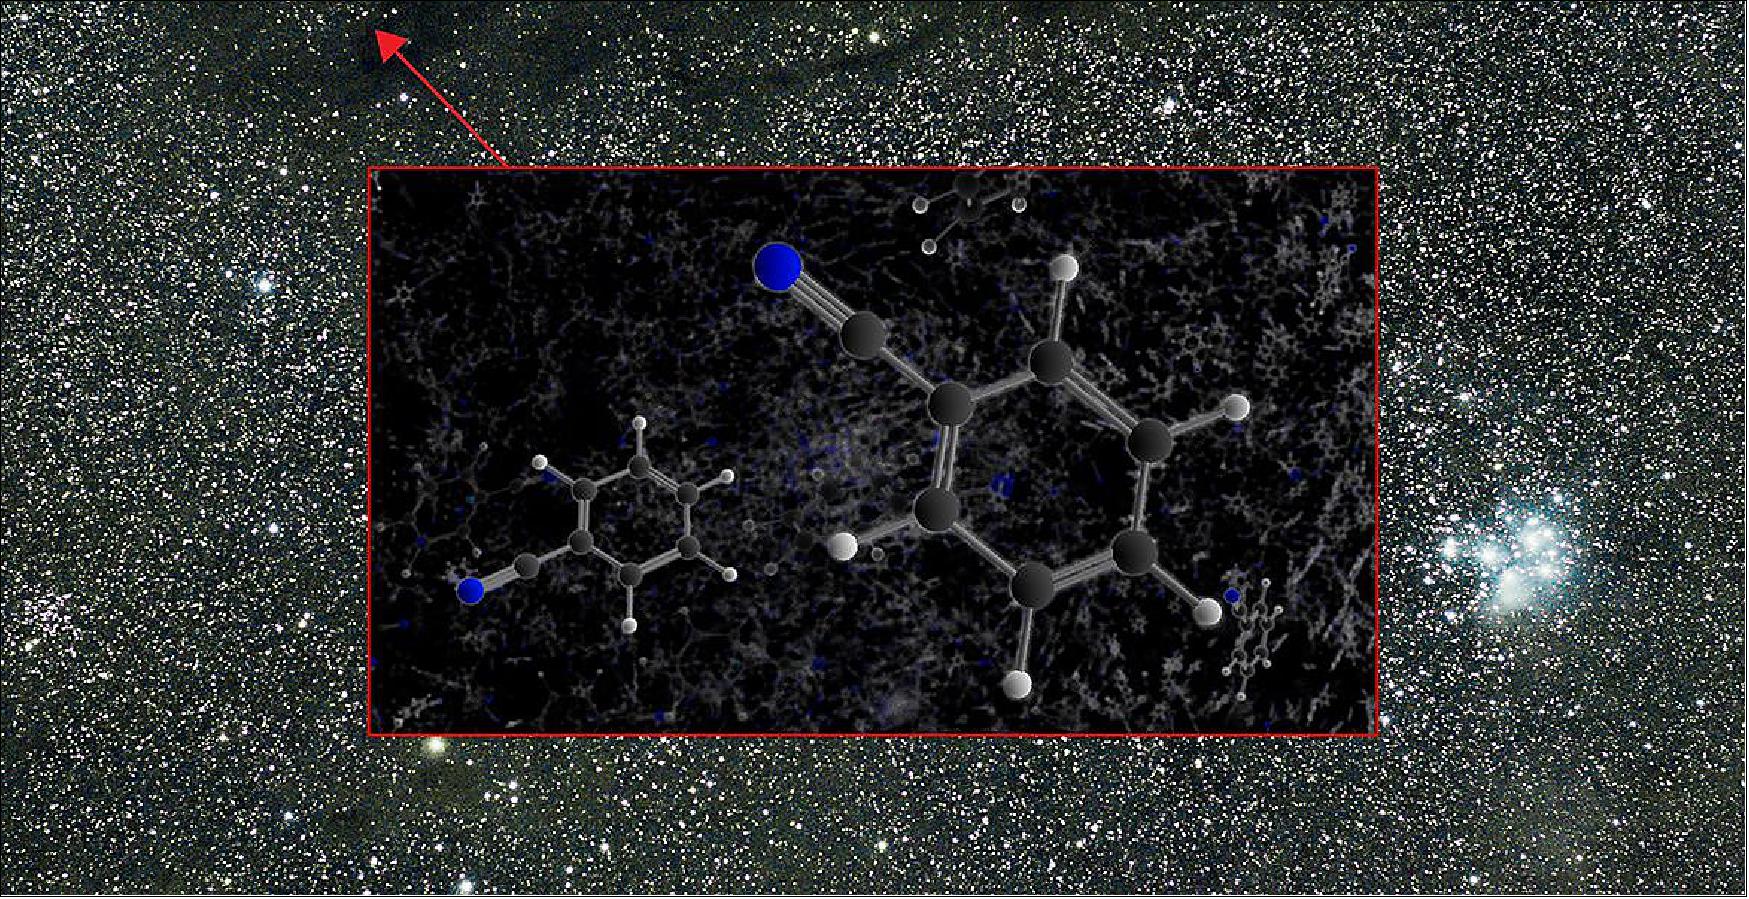 Figure 62: The aromatic molecule benzonitrile was detected by the GBT in the Taurus Molecular Cloud 1 (TMC-1), image credit: B. McGuire, B. Saxton (NRAO/AUI/NSF)